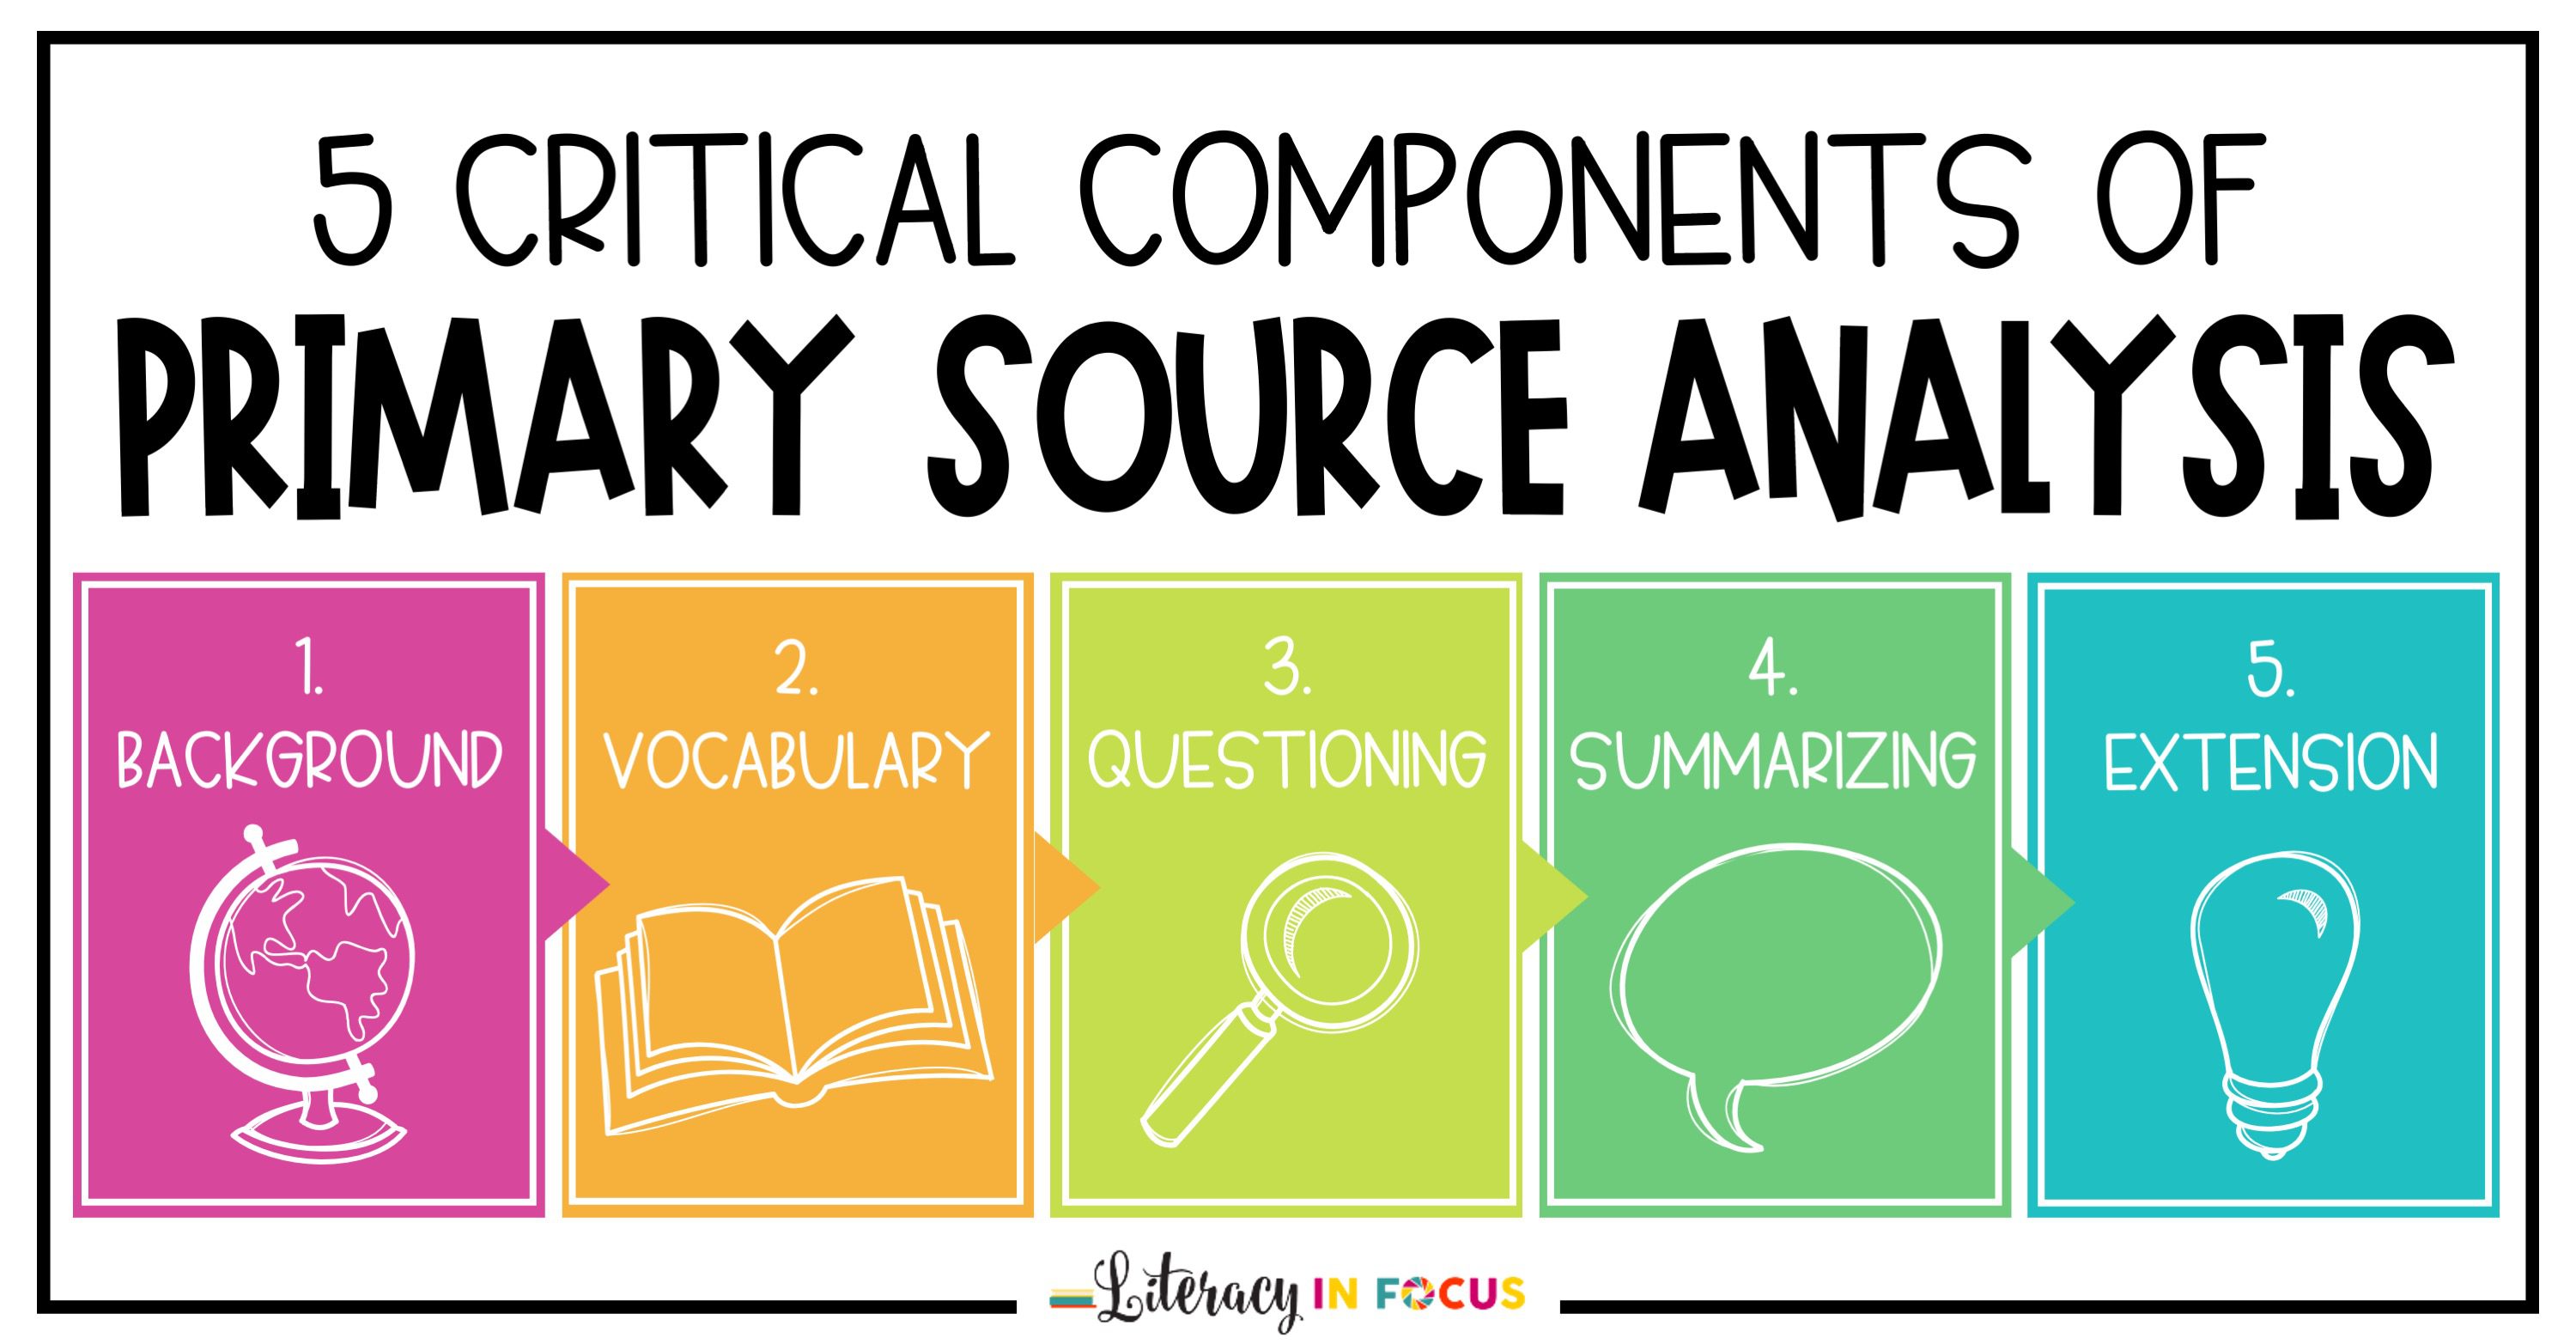 Analyzing Sources